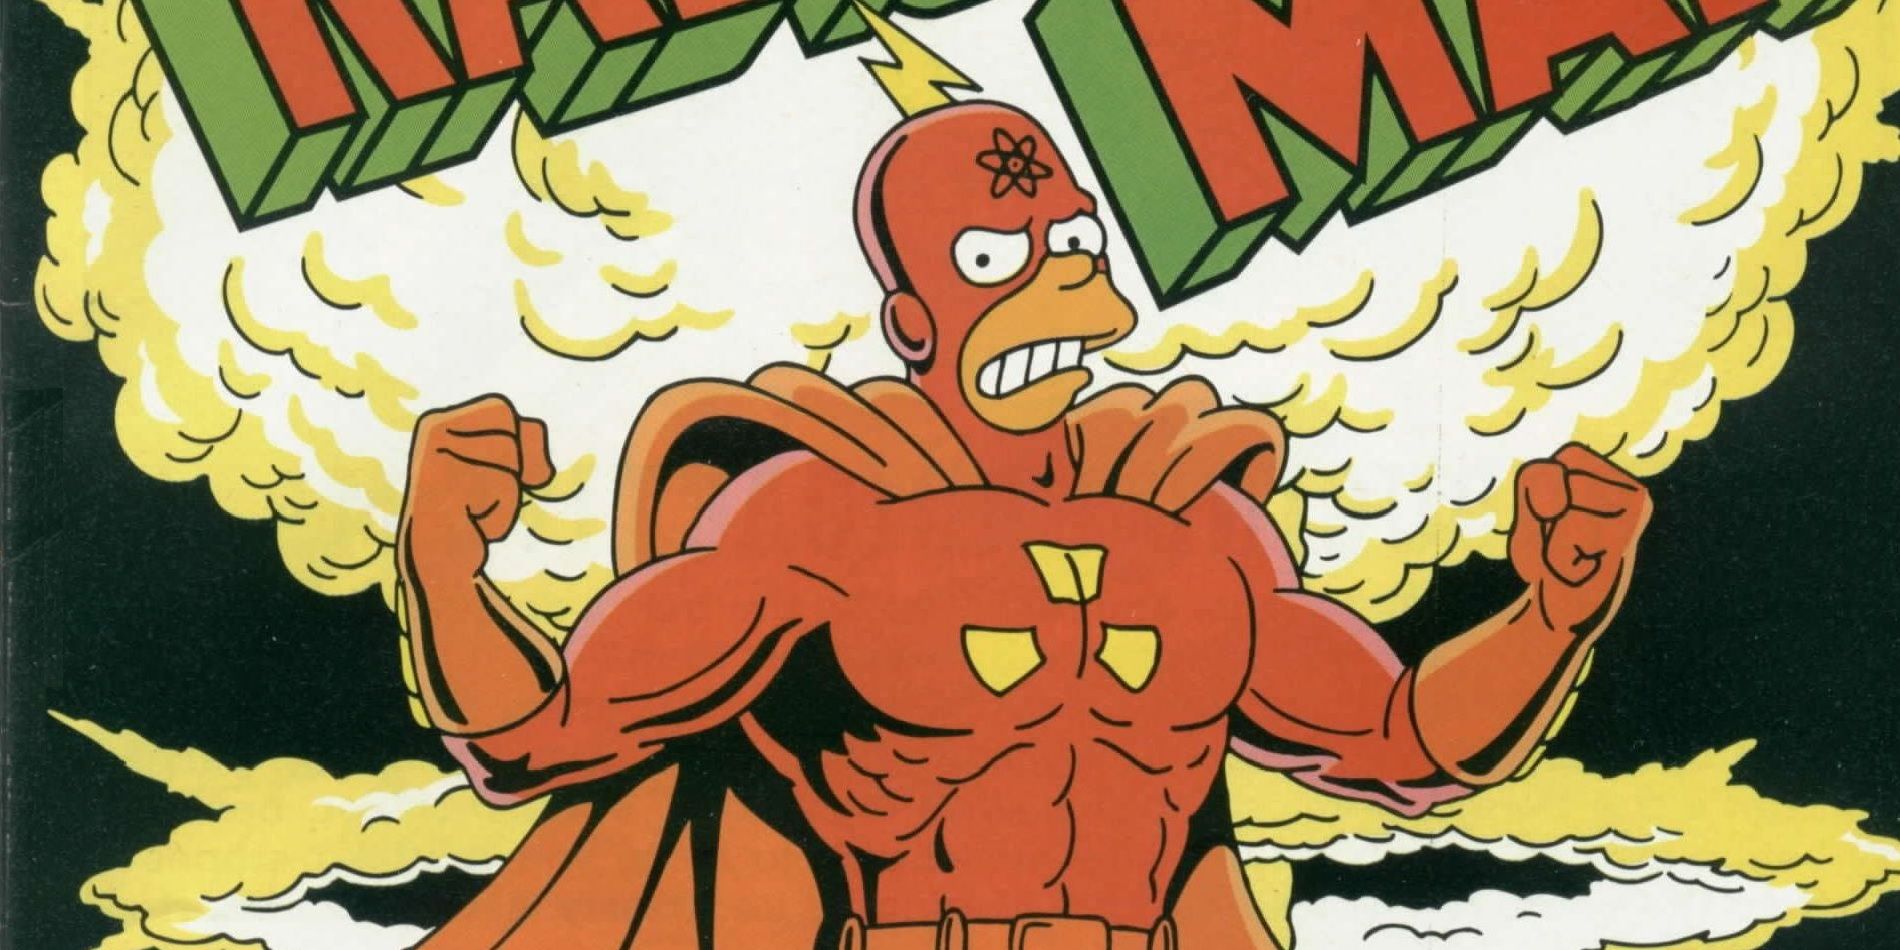 Radioactive Man from the Simpsons